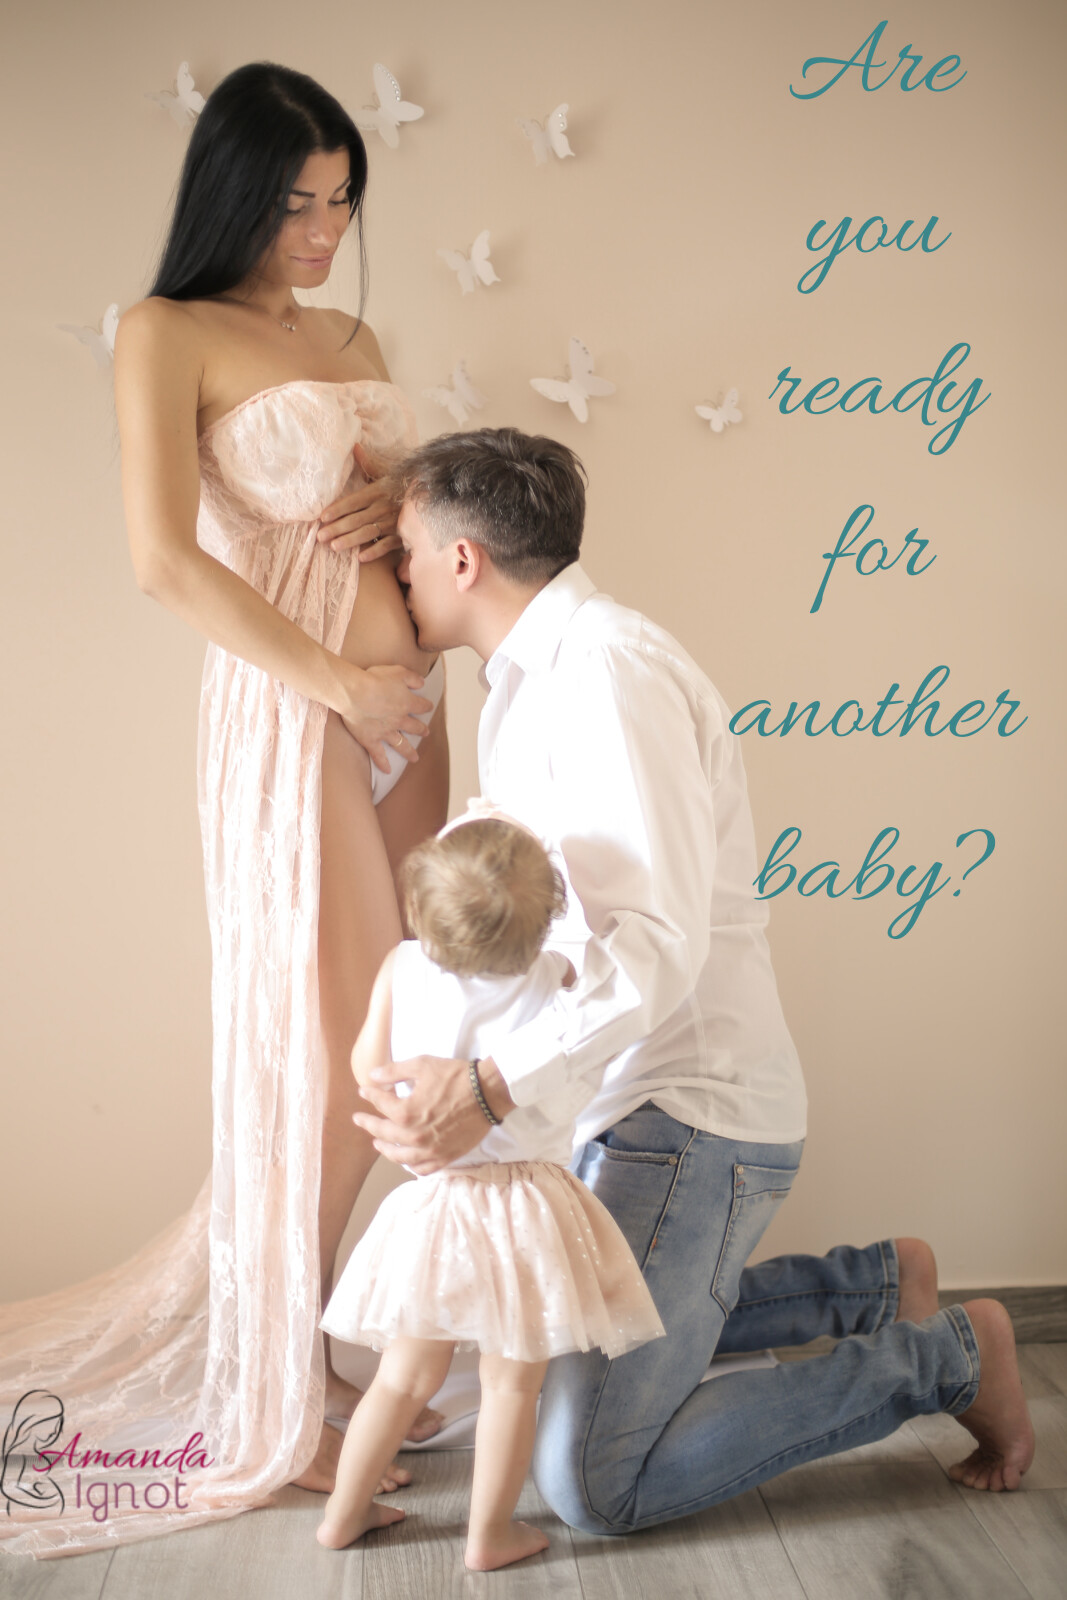 Are you ready for another baby?